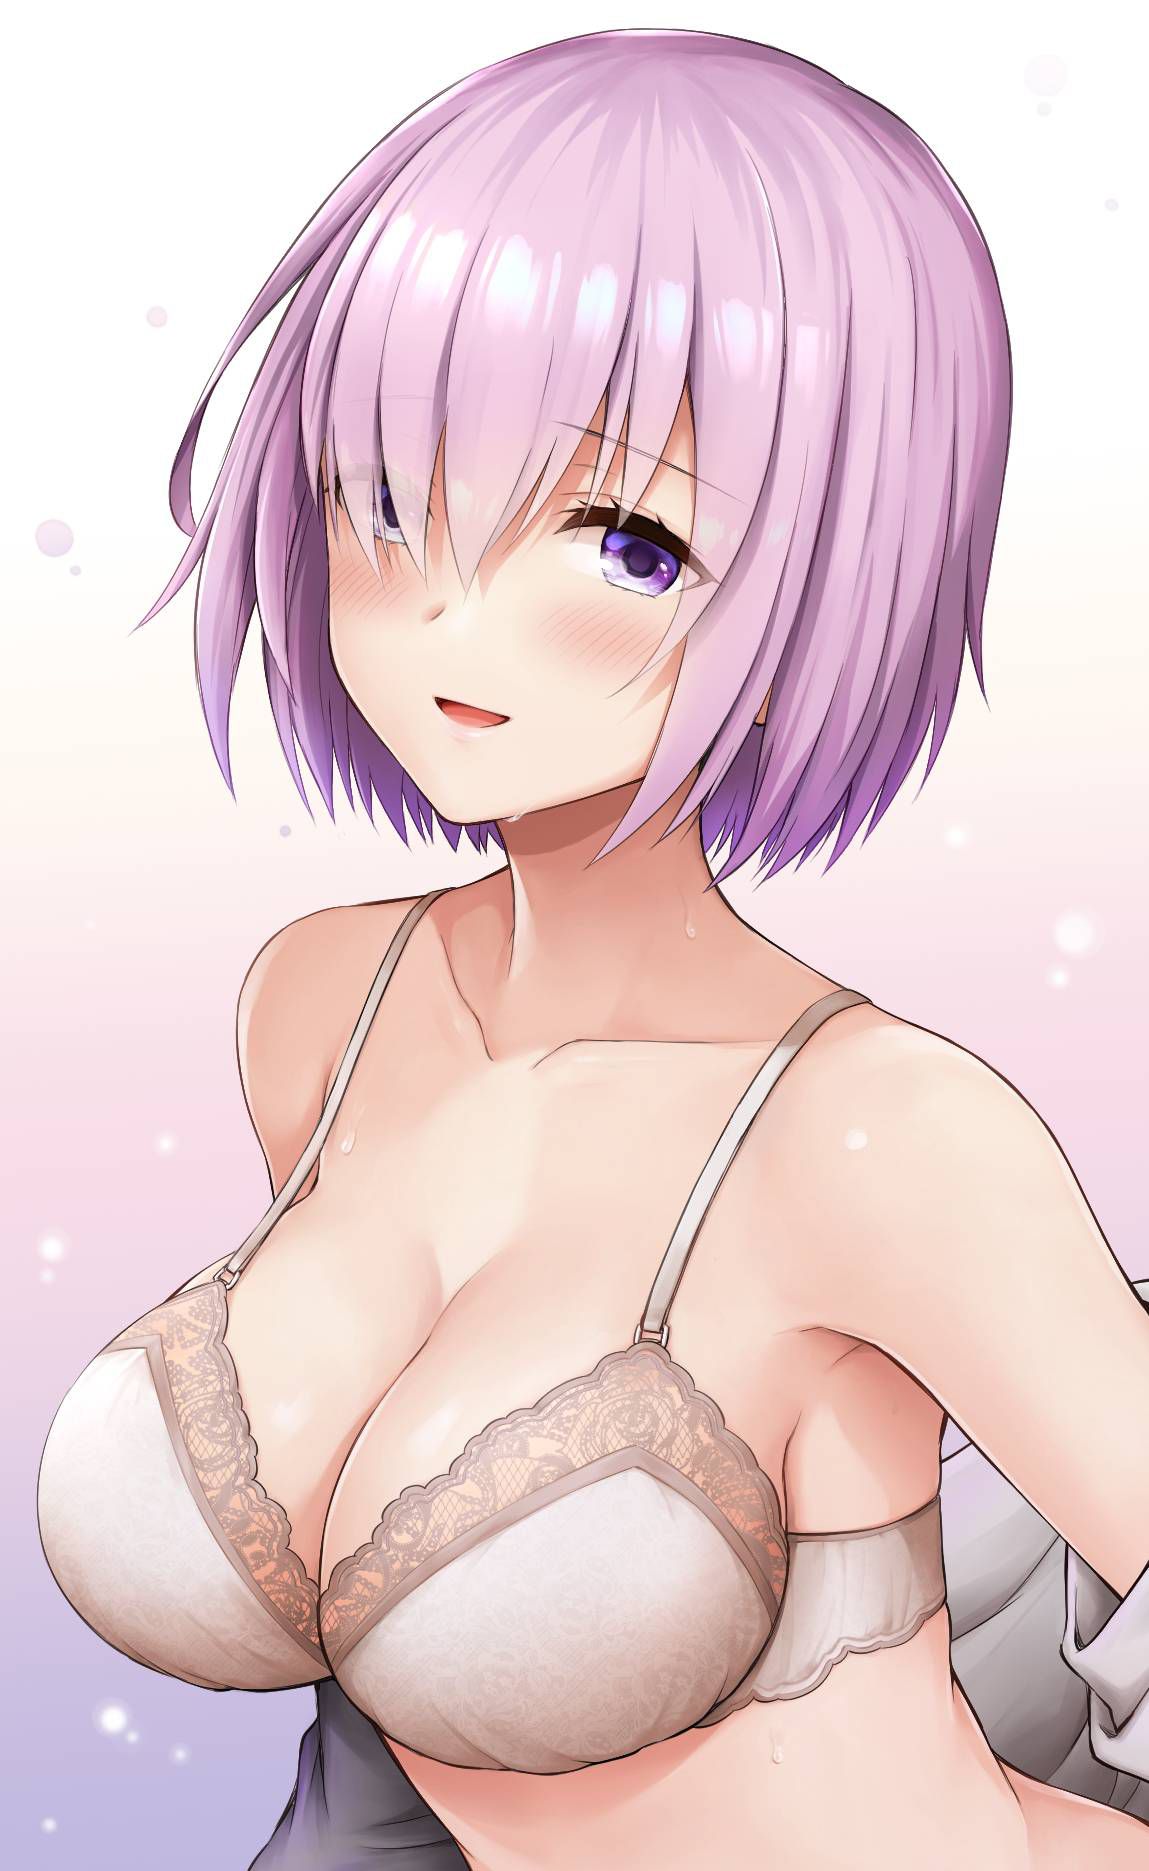 【Secondary】 Fate/Grand Order sealer, Mash Kyrielite's little erotic image summary! No.18 [20 sheets] 16